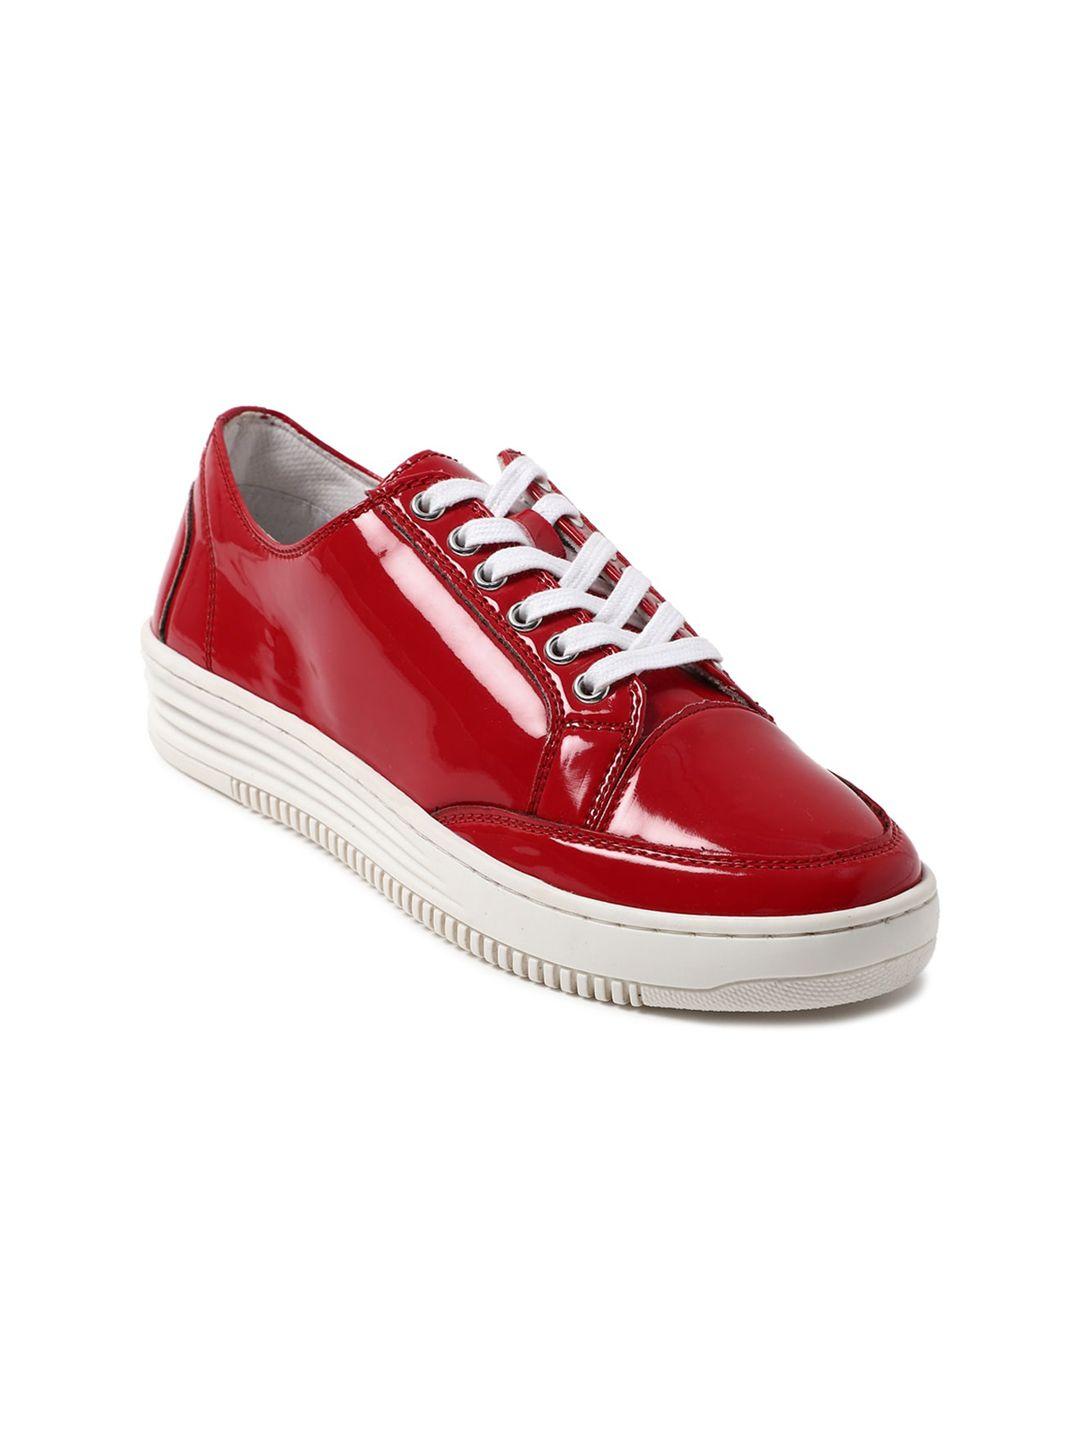 forever-21-women-red-textured-pu-sneakers